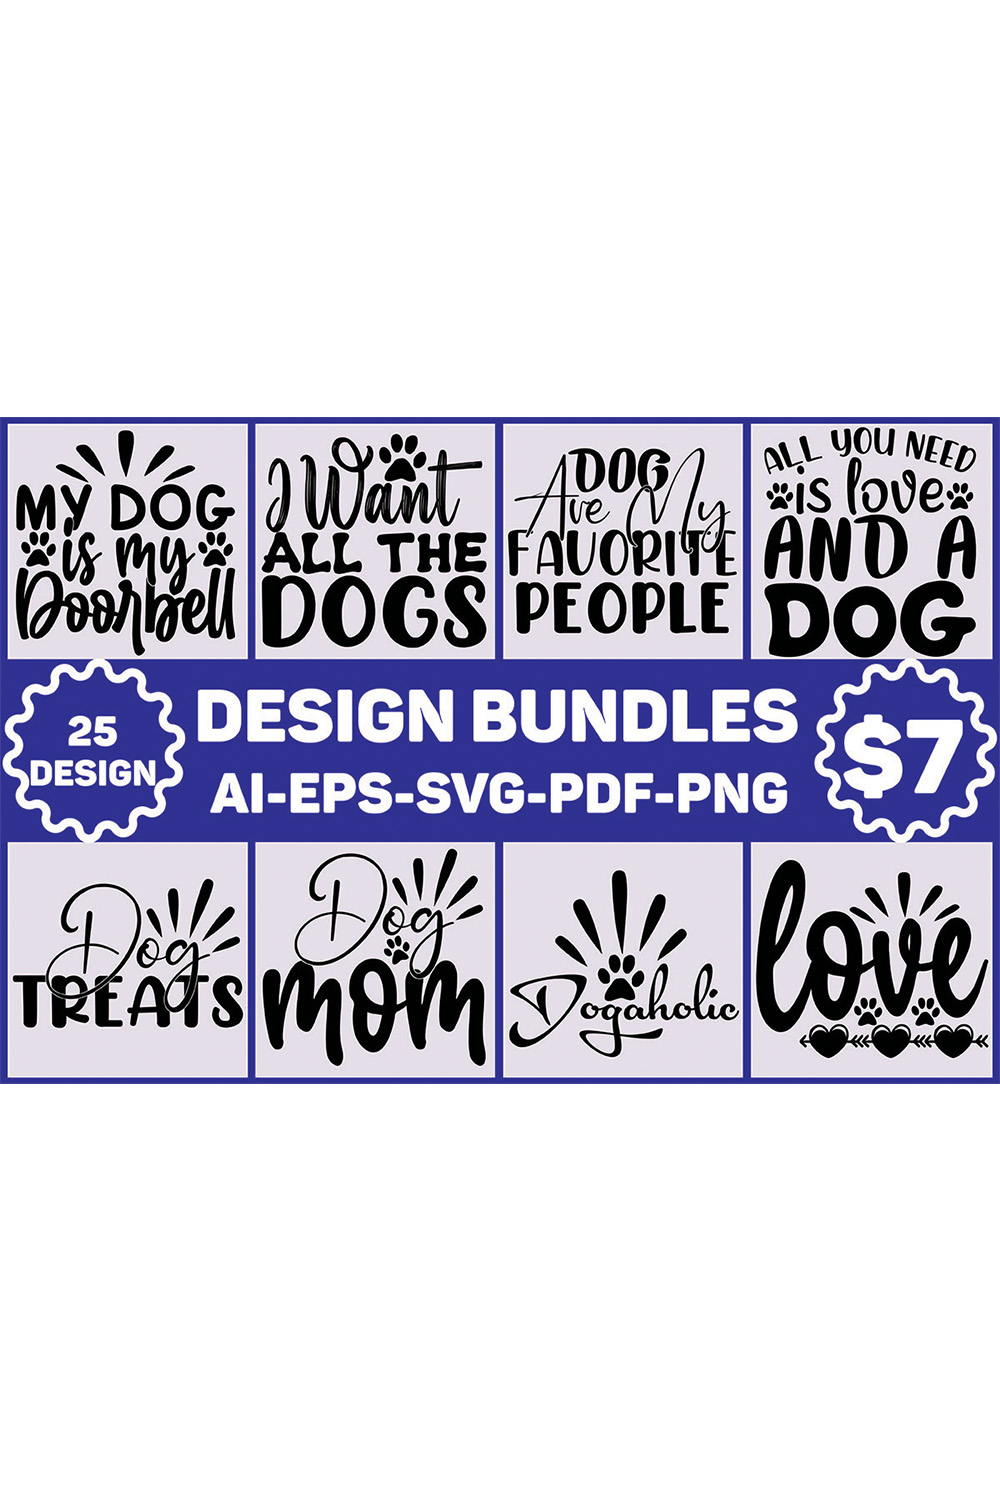 Blue and white sign that says design bundles $ 7 99.